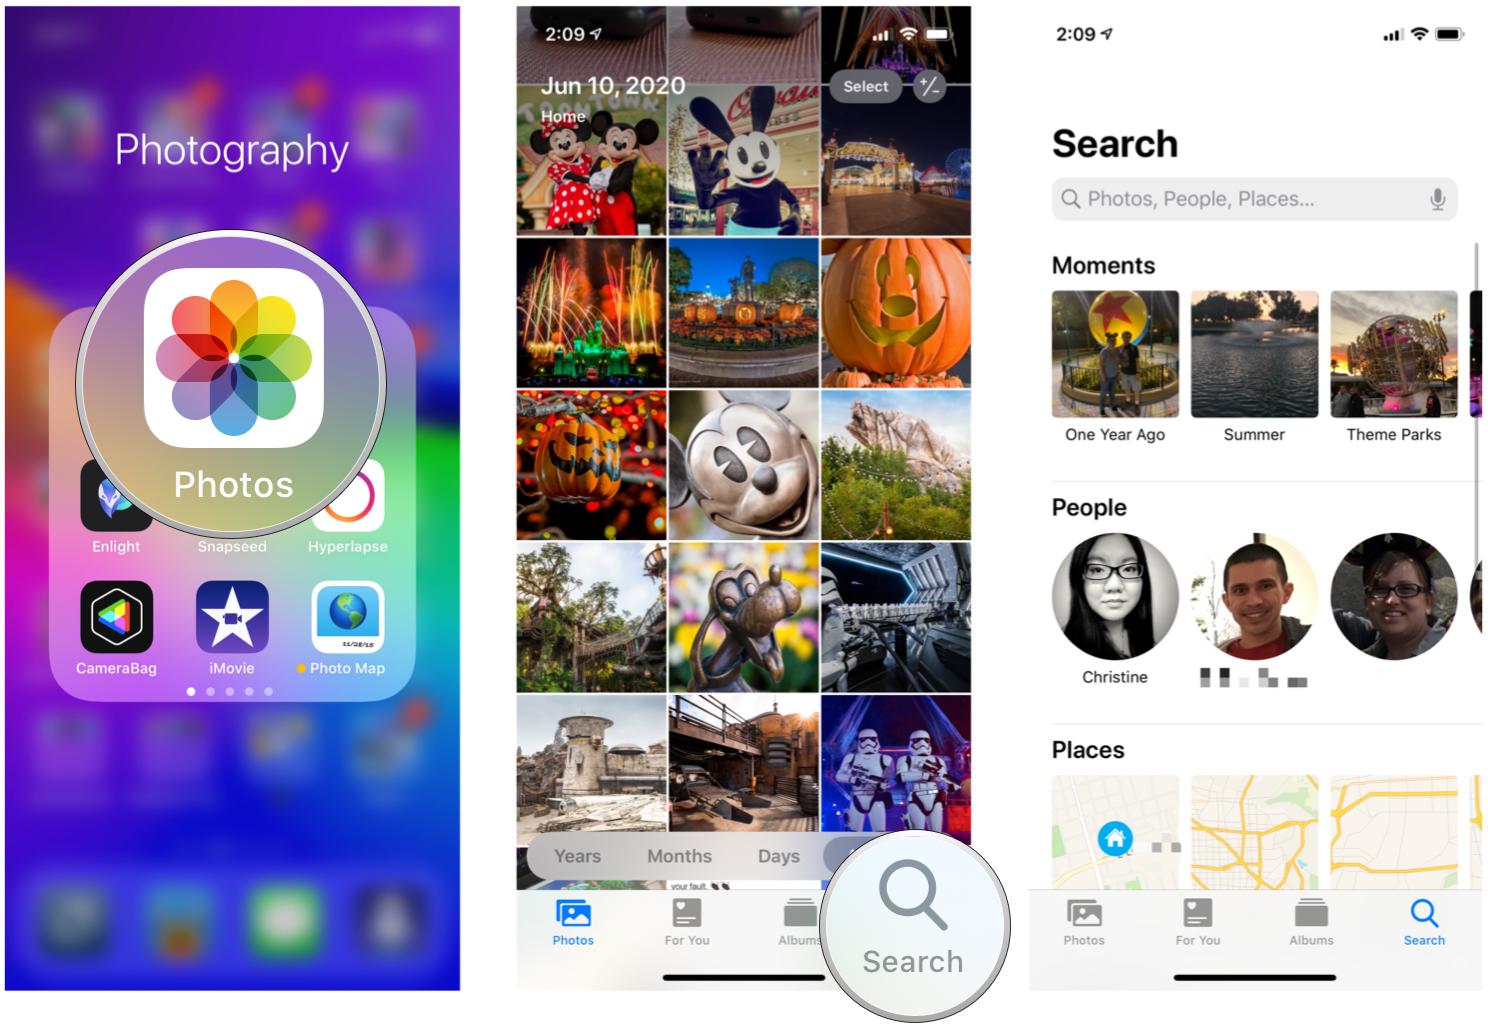 How to search for photos in the Photos app on iPhone and iPad by showing steps: Launch Photos, tap Search, and then browse